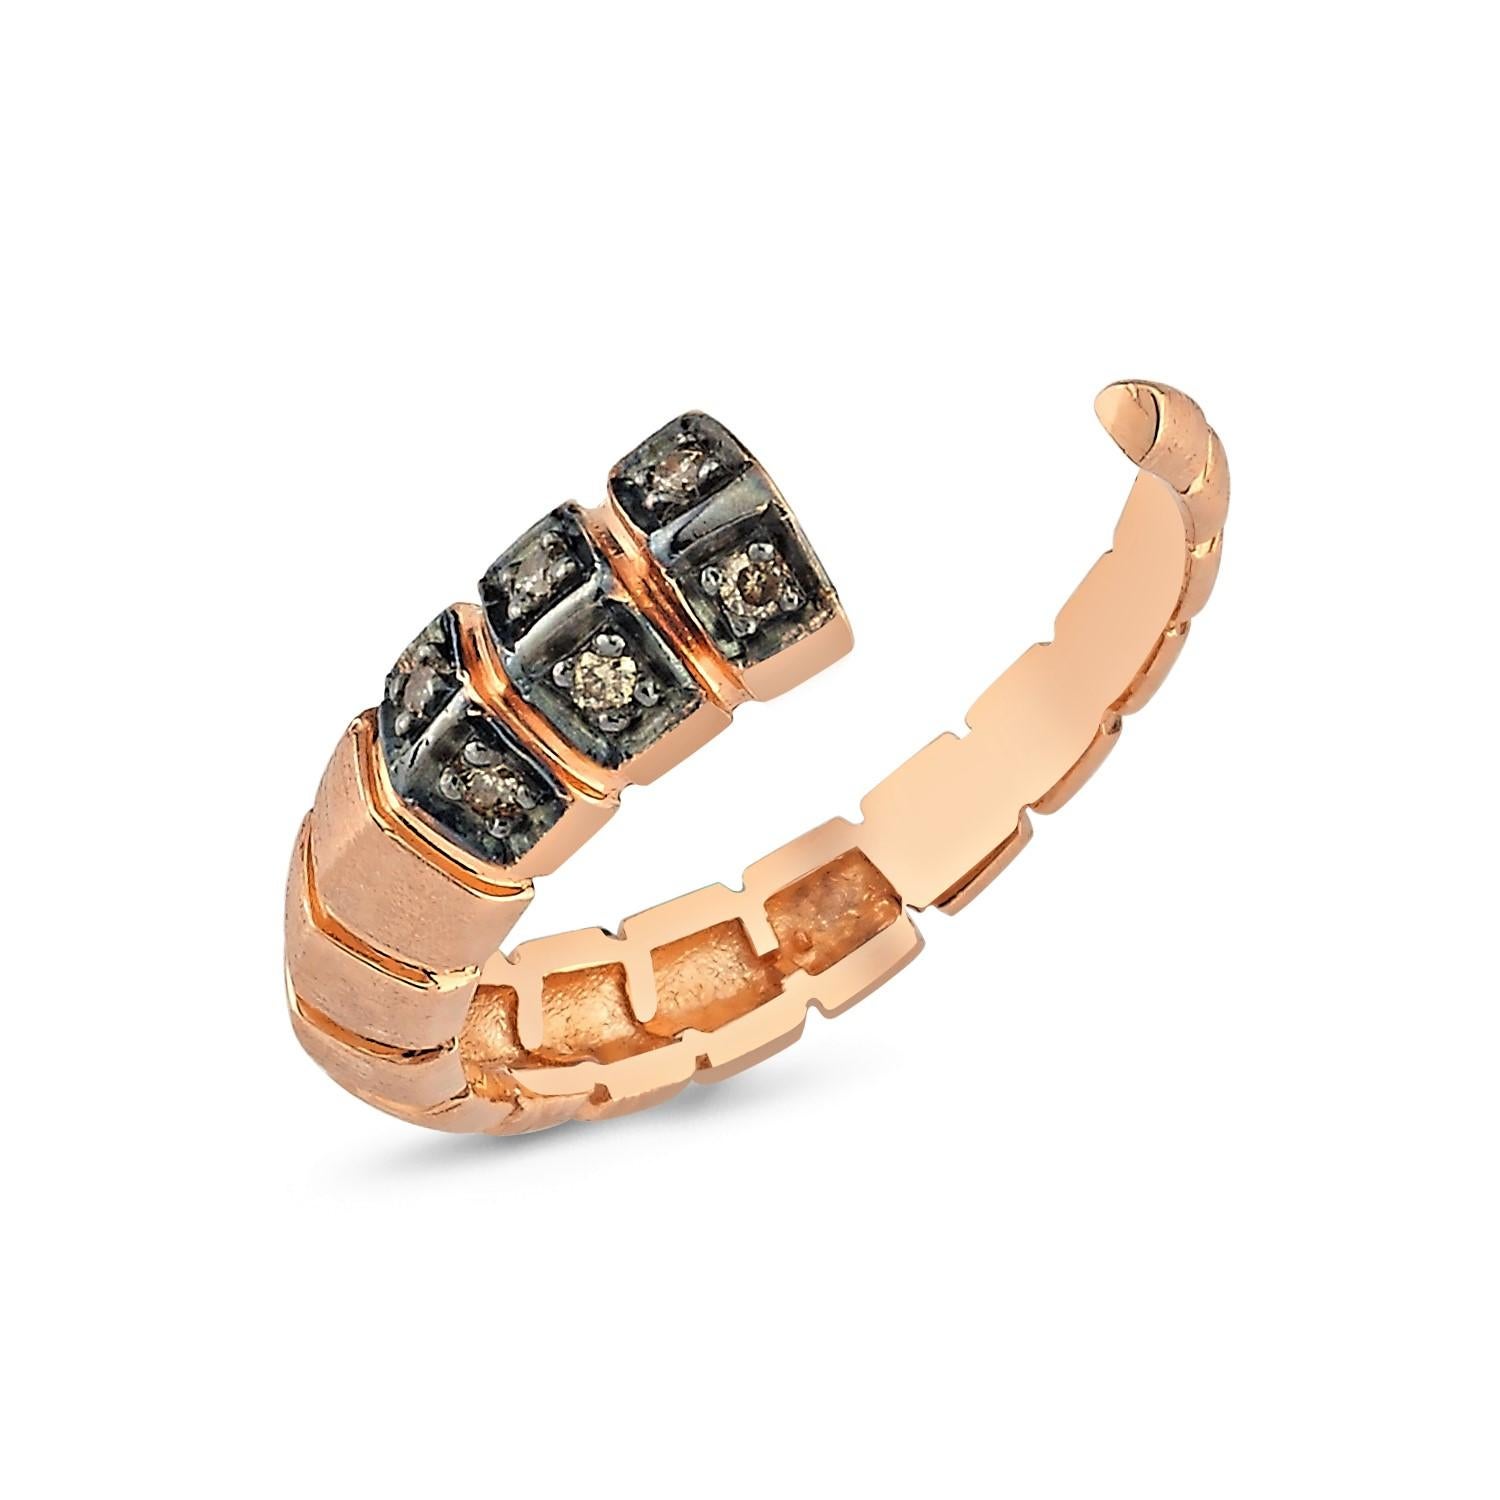 Dragon Tail Open Ring İn Rose Gold With Cognac Diamond By Selda Jewellery

Additional Information:-
Collection: Dragon Lady Collection
14k Rose Gold
0.06ct Cognac Diamond